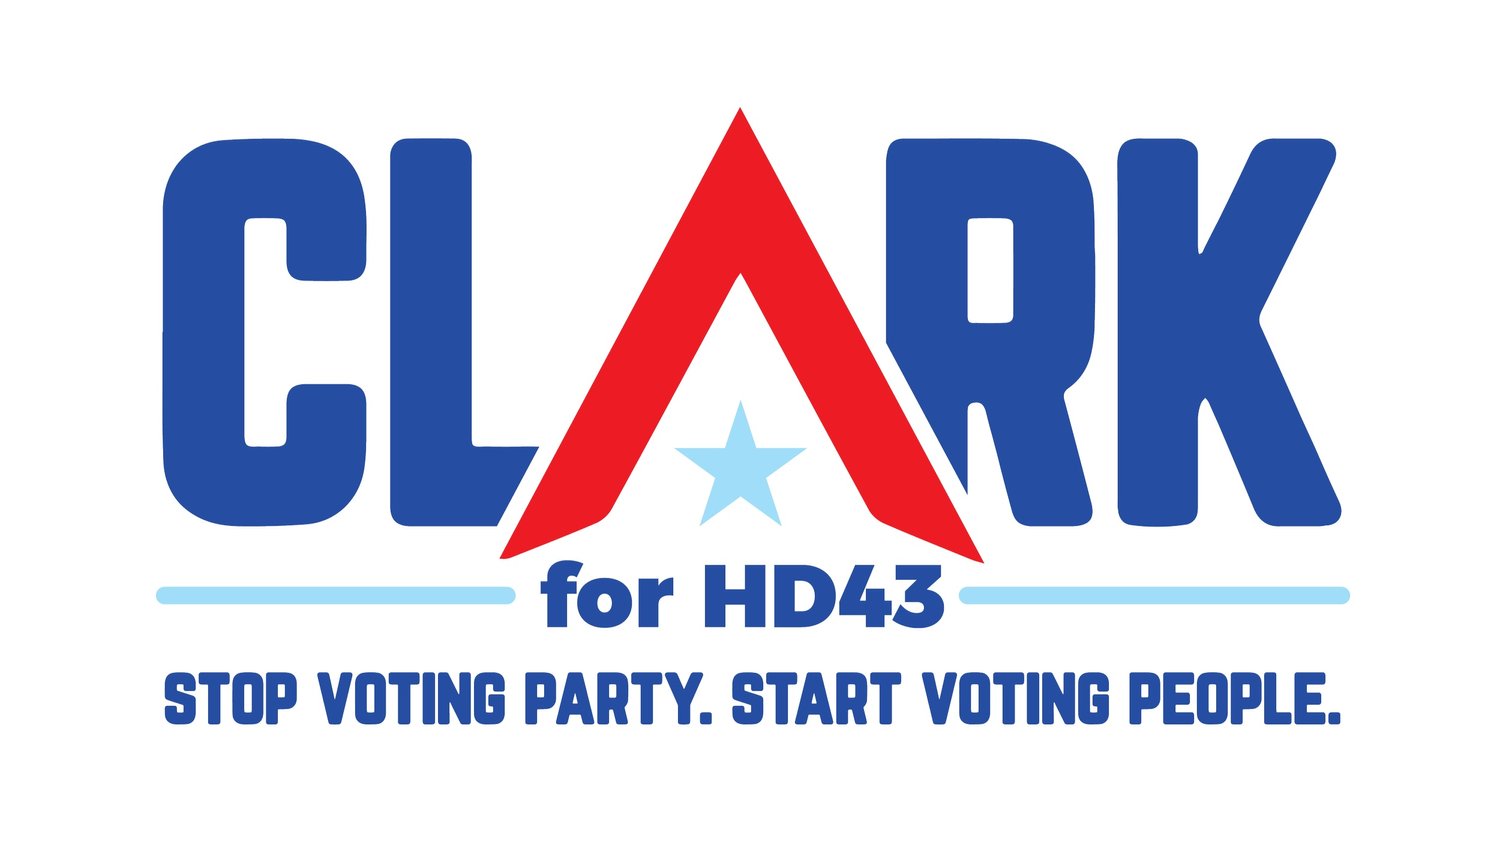 Clark for HD43